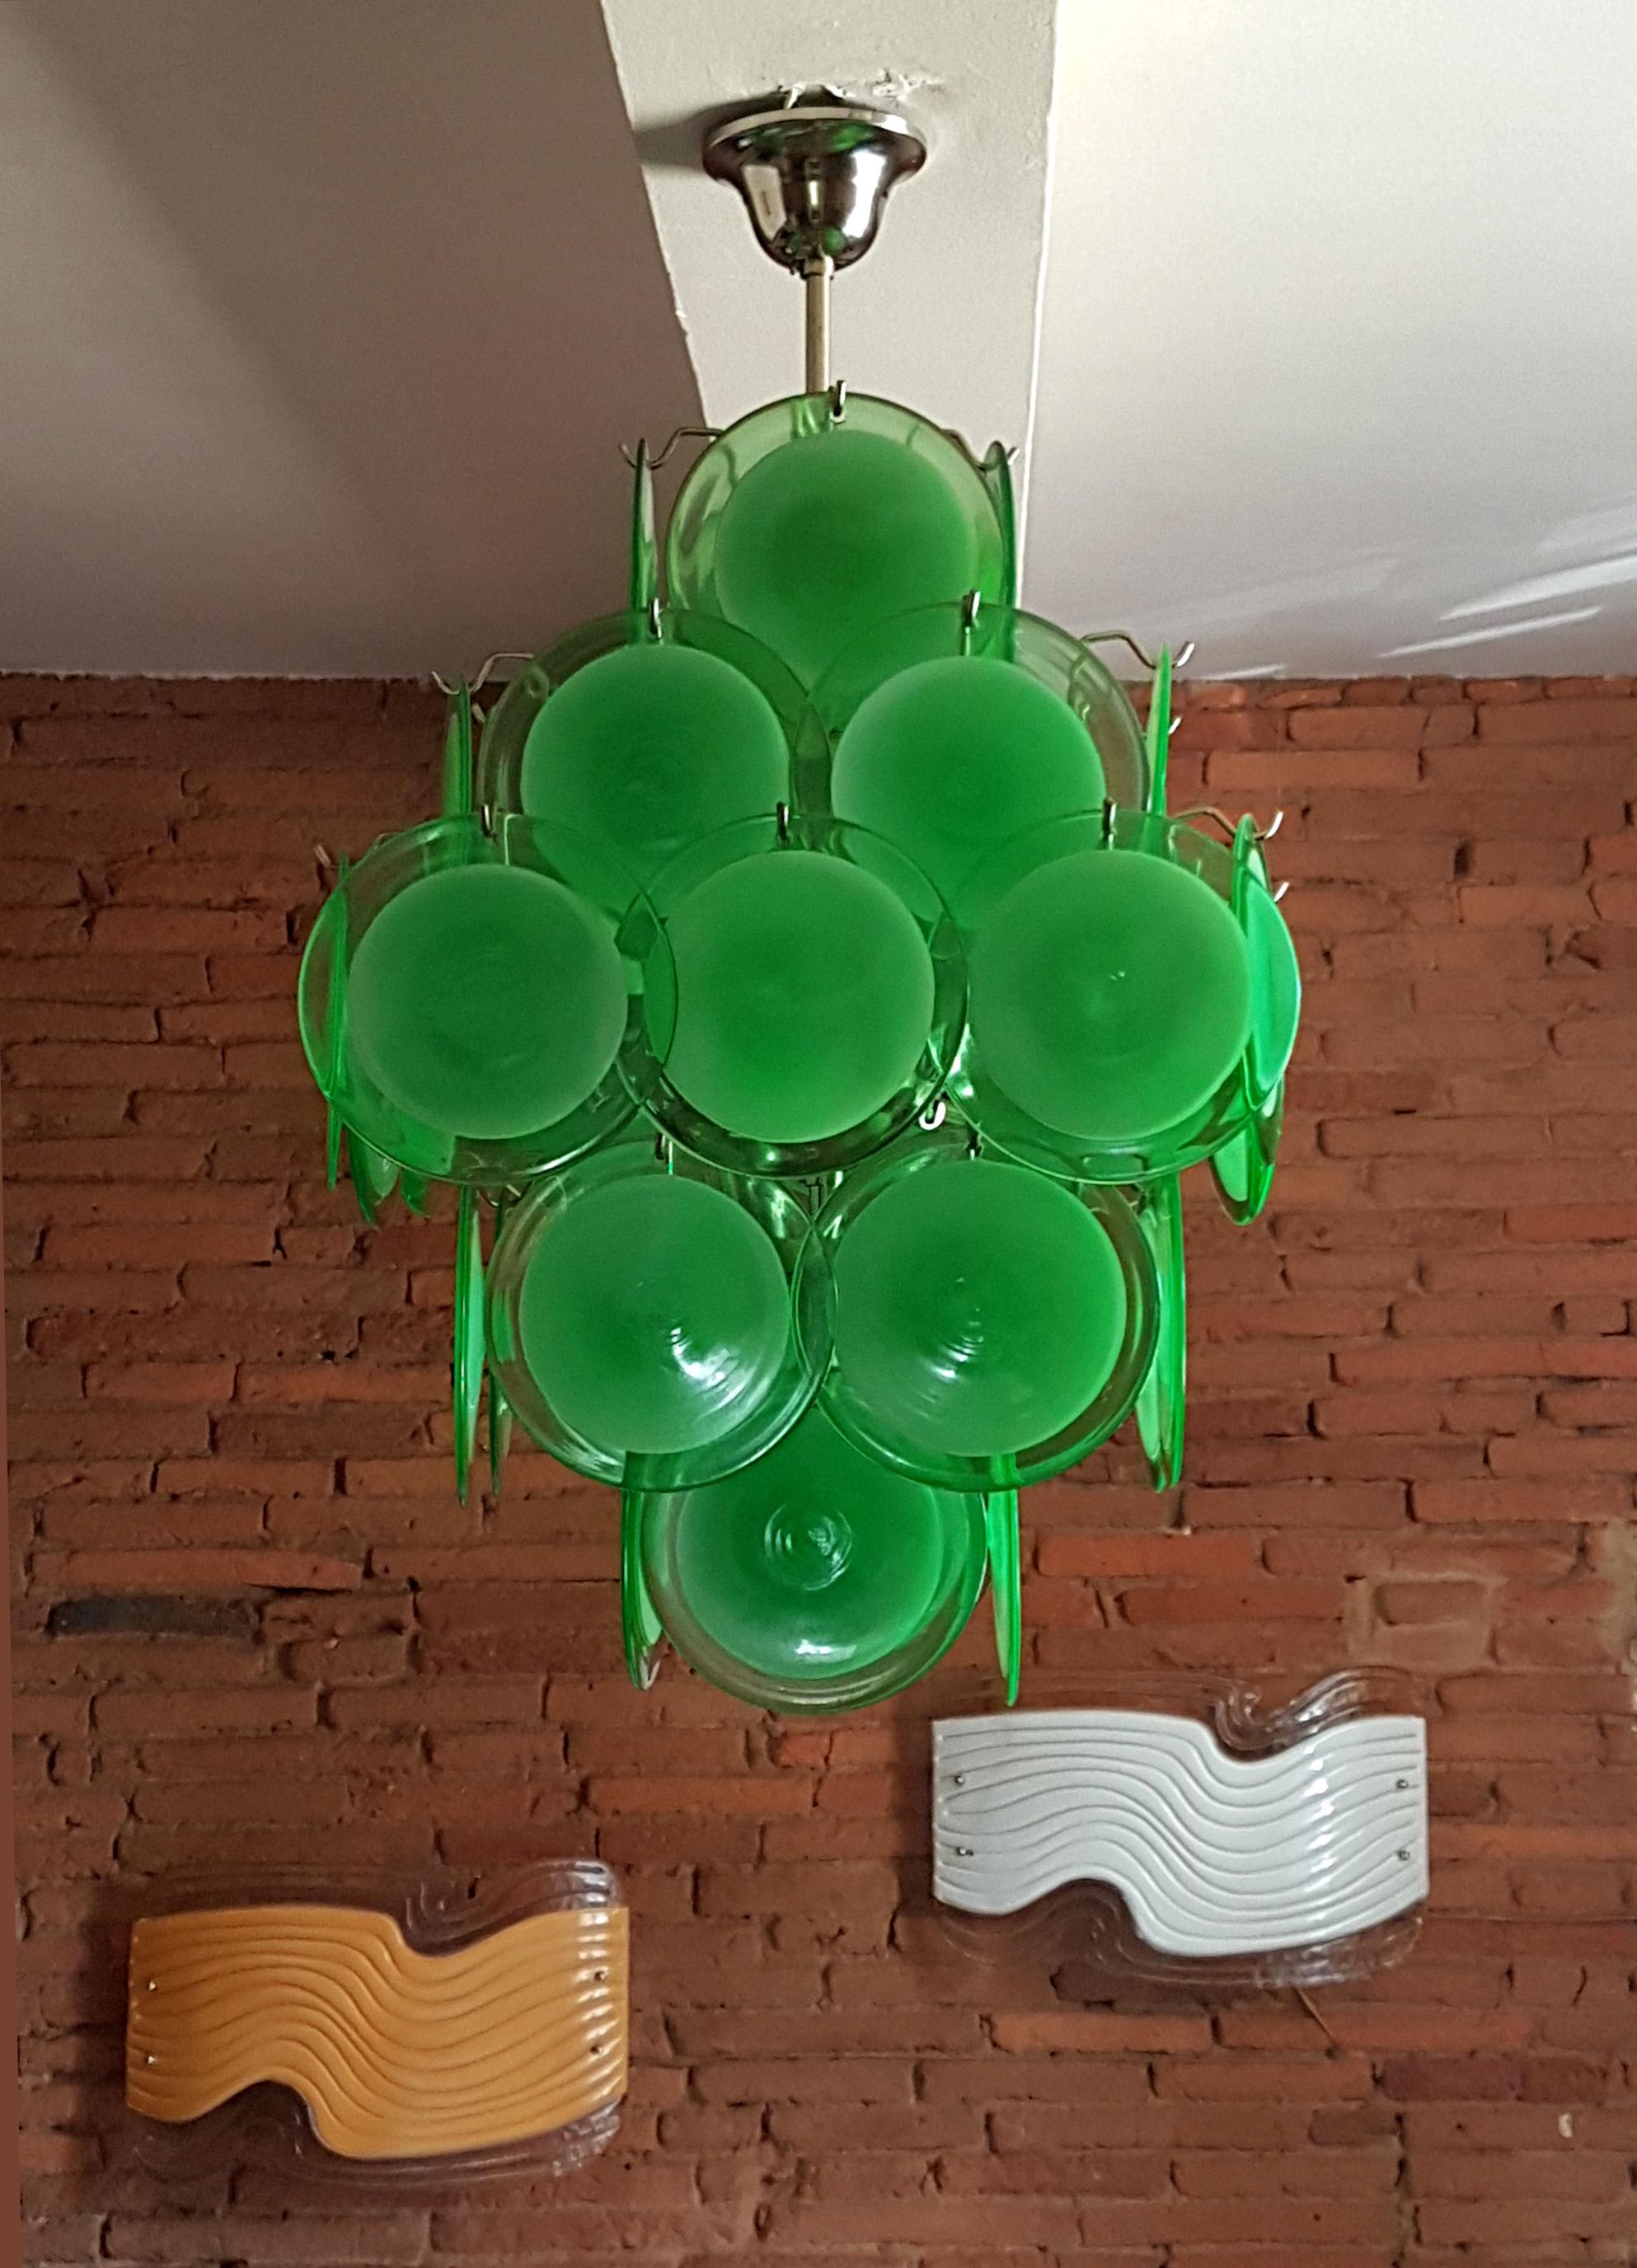 Green Mid-Century Modern Murano glass and chrome frame disc chandelier, by Vistosi.
Italy, 1970s.
Pyramidal shape. 
Each hand blown green disc is translucent in the center, and transparent on the edge.
The Mid-Century Modern chandelier has 5